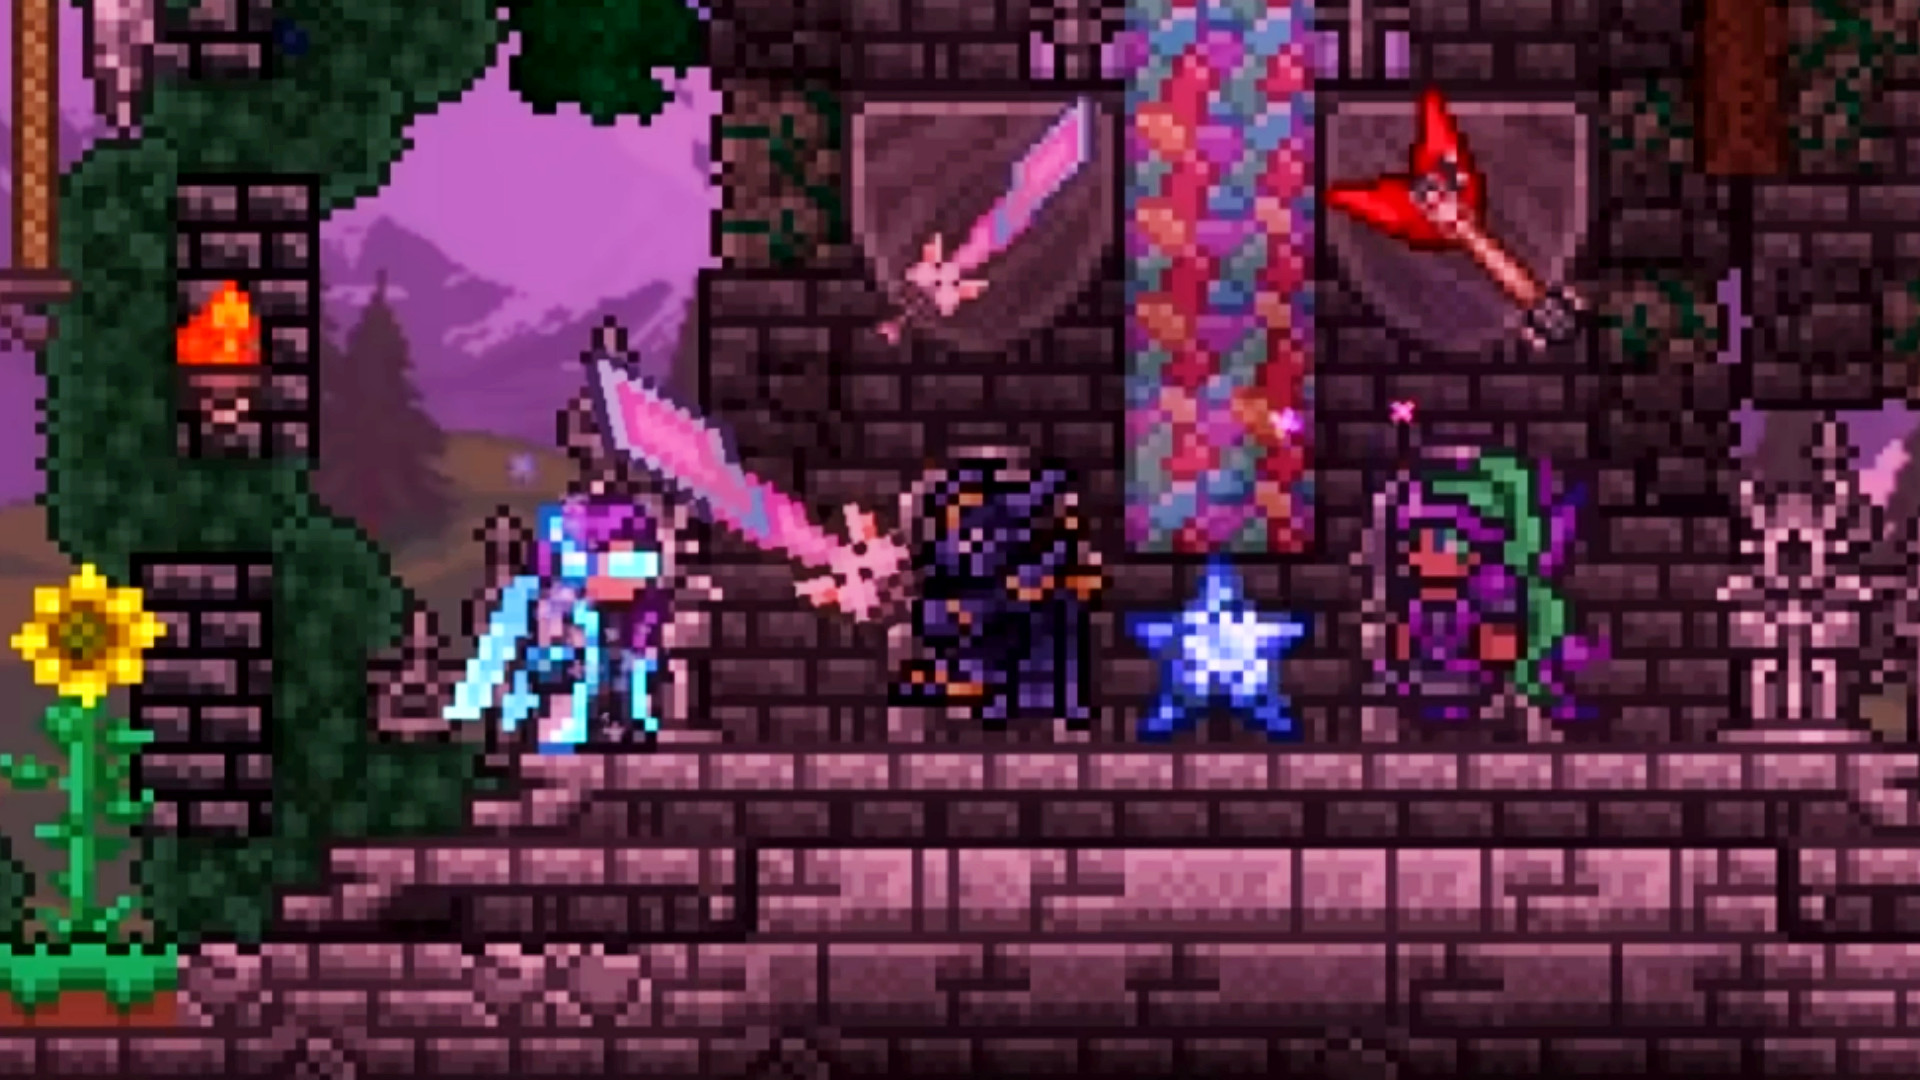 Terraria 1.4.5 gets stylish new armor and decoration tools